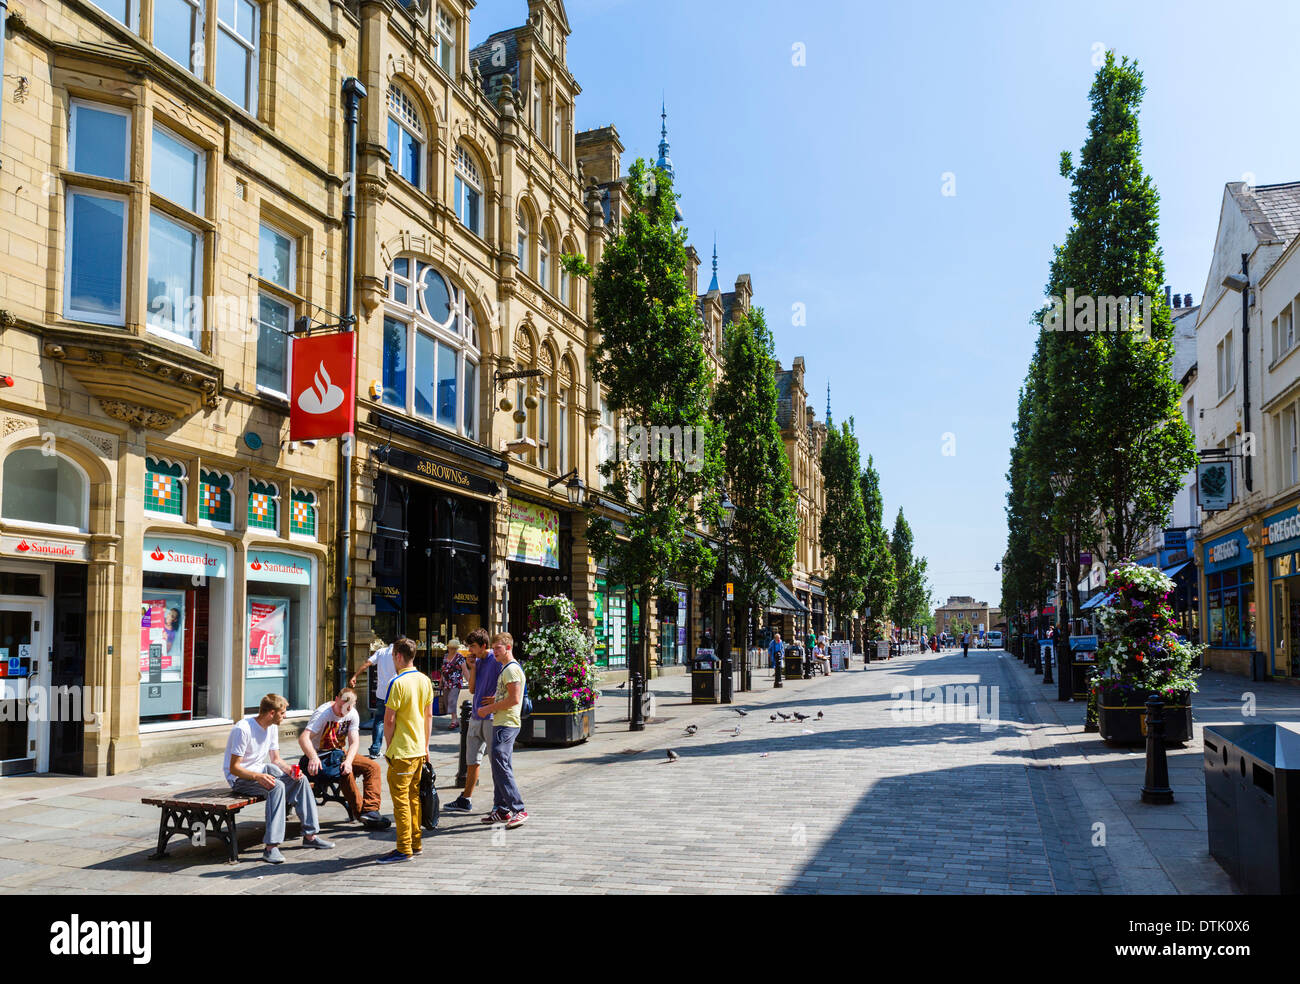 Shops on Cornmarket in the city centre, Halifax, West Yorkshire, England, UK Stock Photo